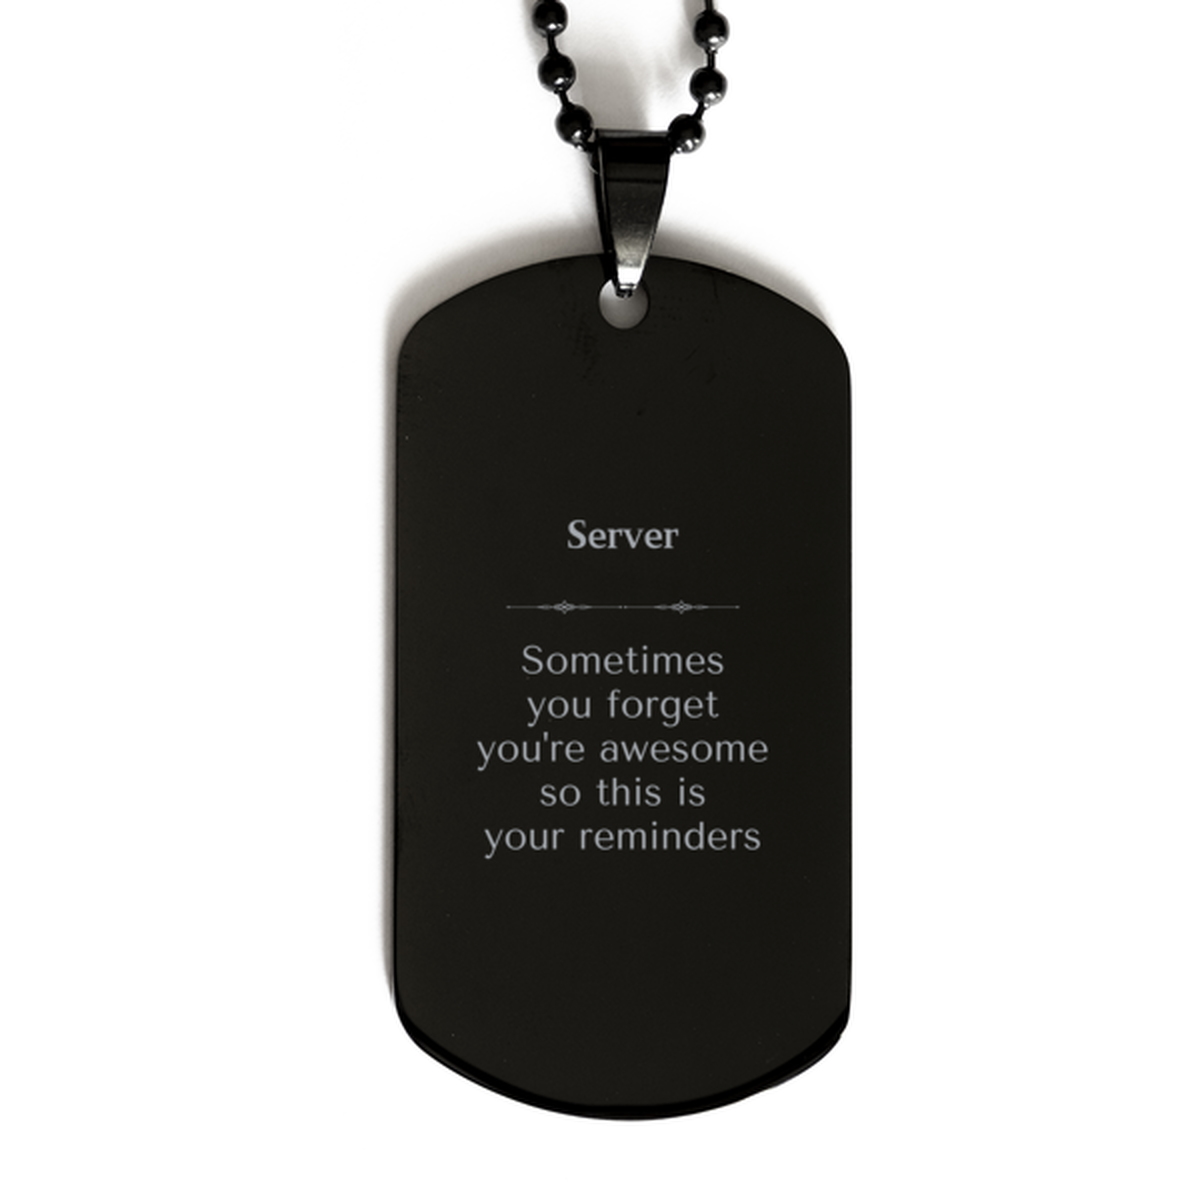 Sentimental Server Black Dog Tag, Server Sometimes you forget you're awesome so this is your reminders, Graduation Christmas Birthday Gifts for Server, Men, Women, Coworkers